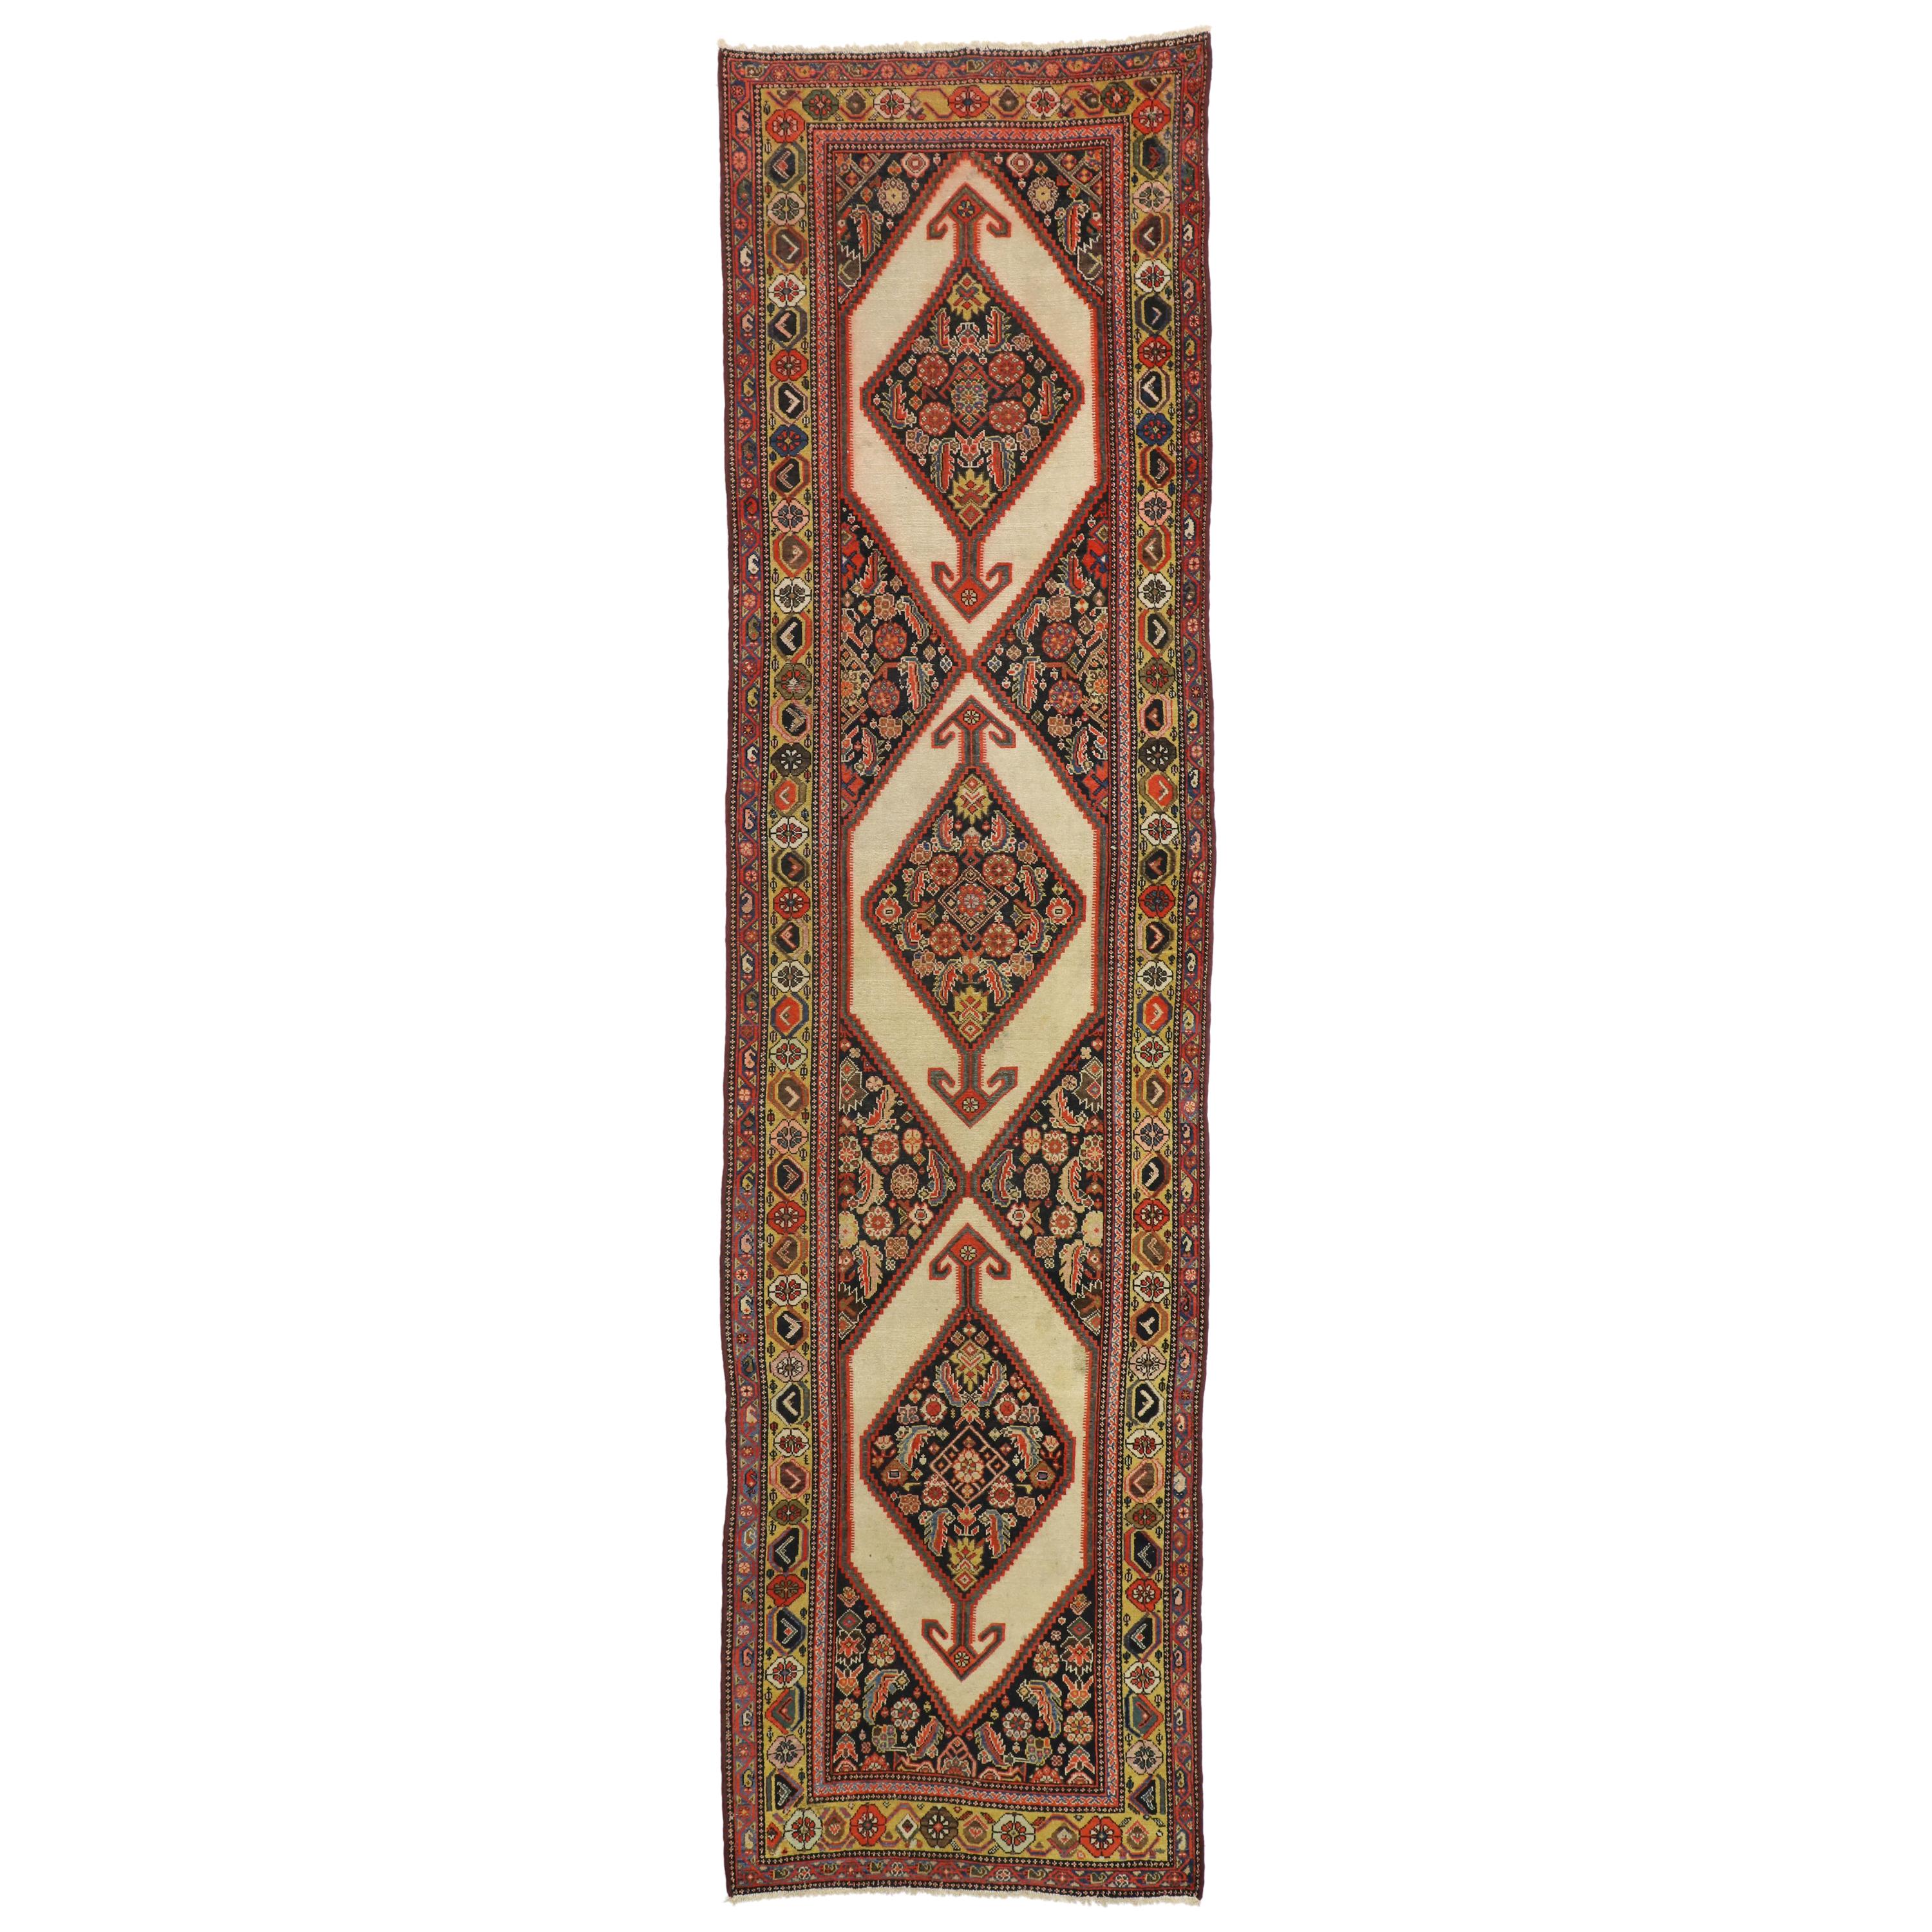 Antique Persian Malayer Runner with Tudor Manor House Style